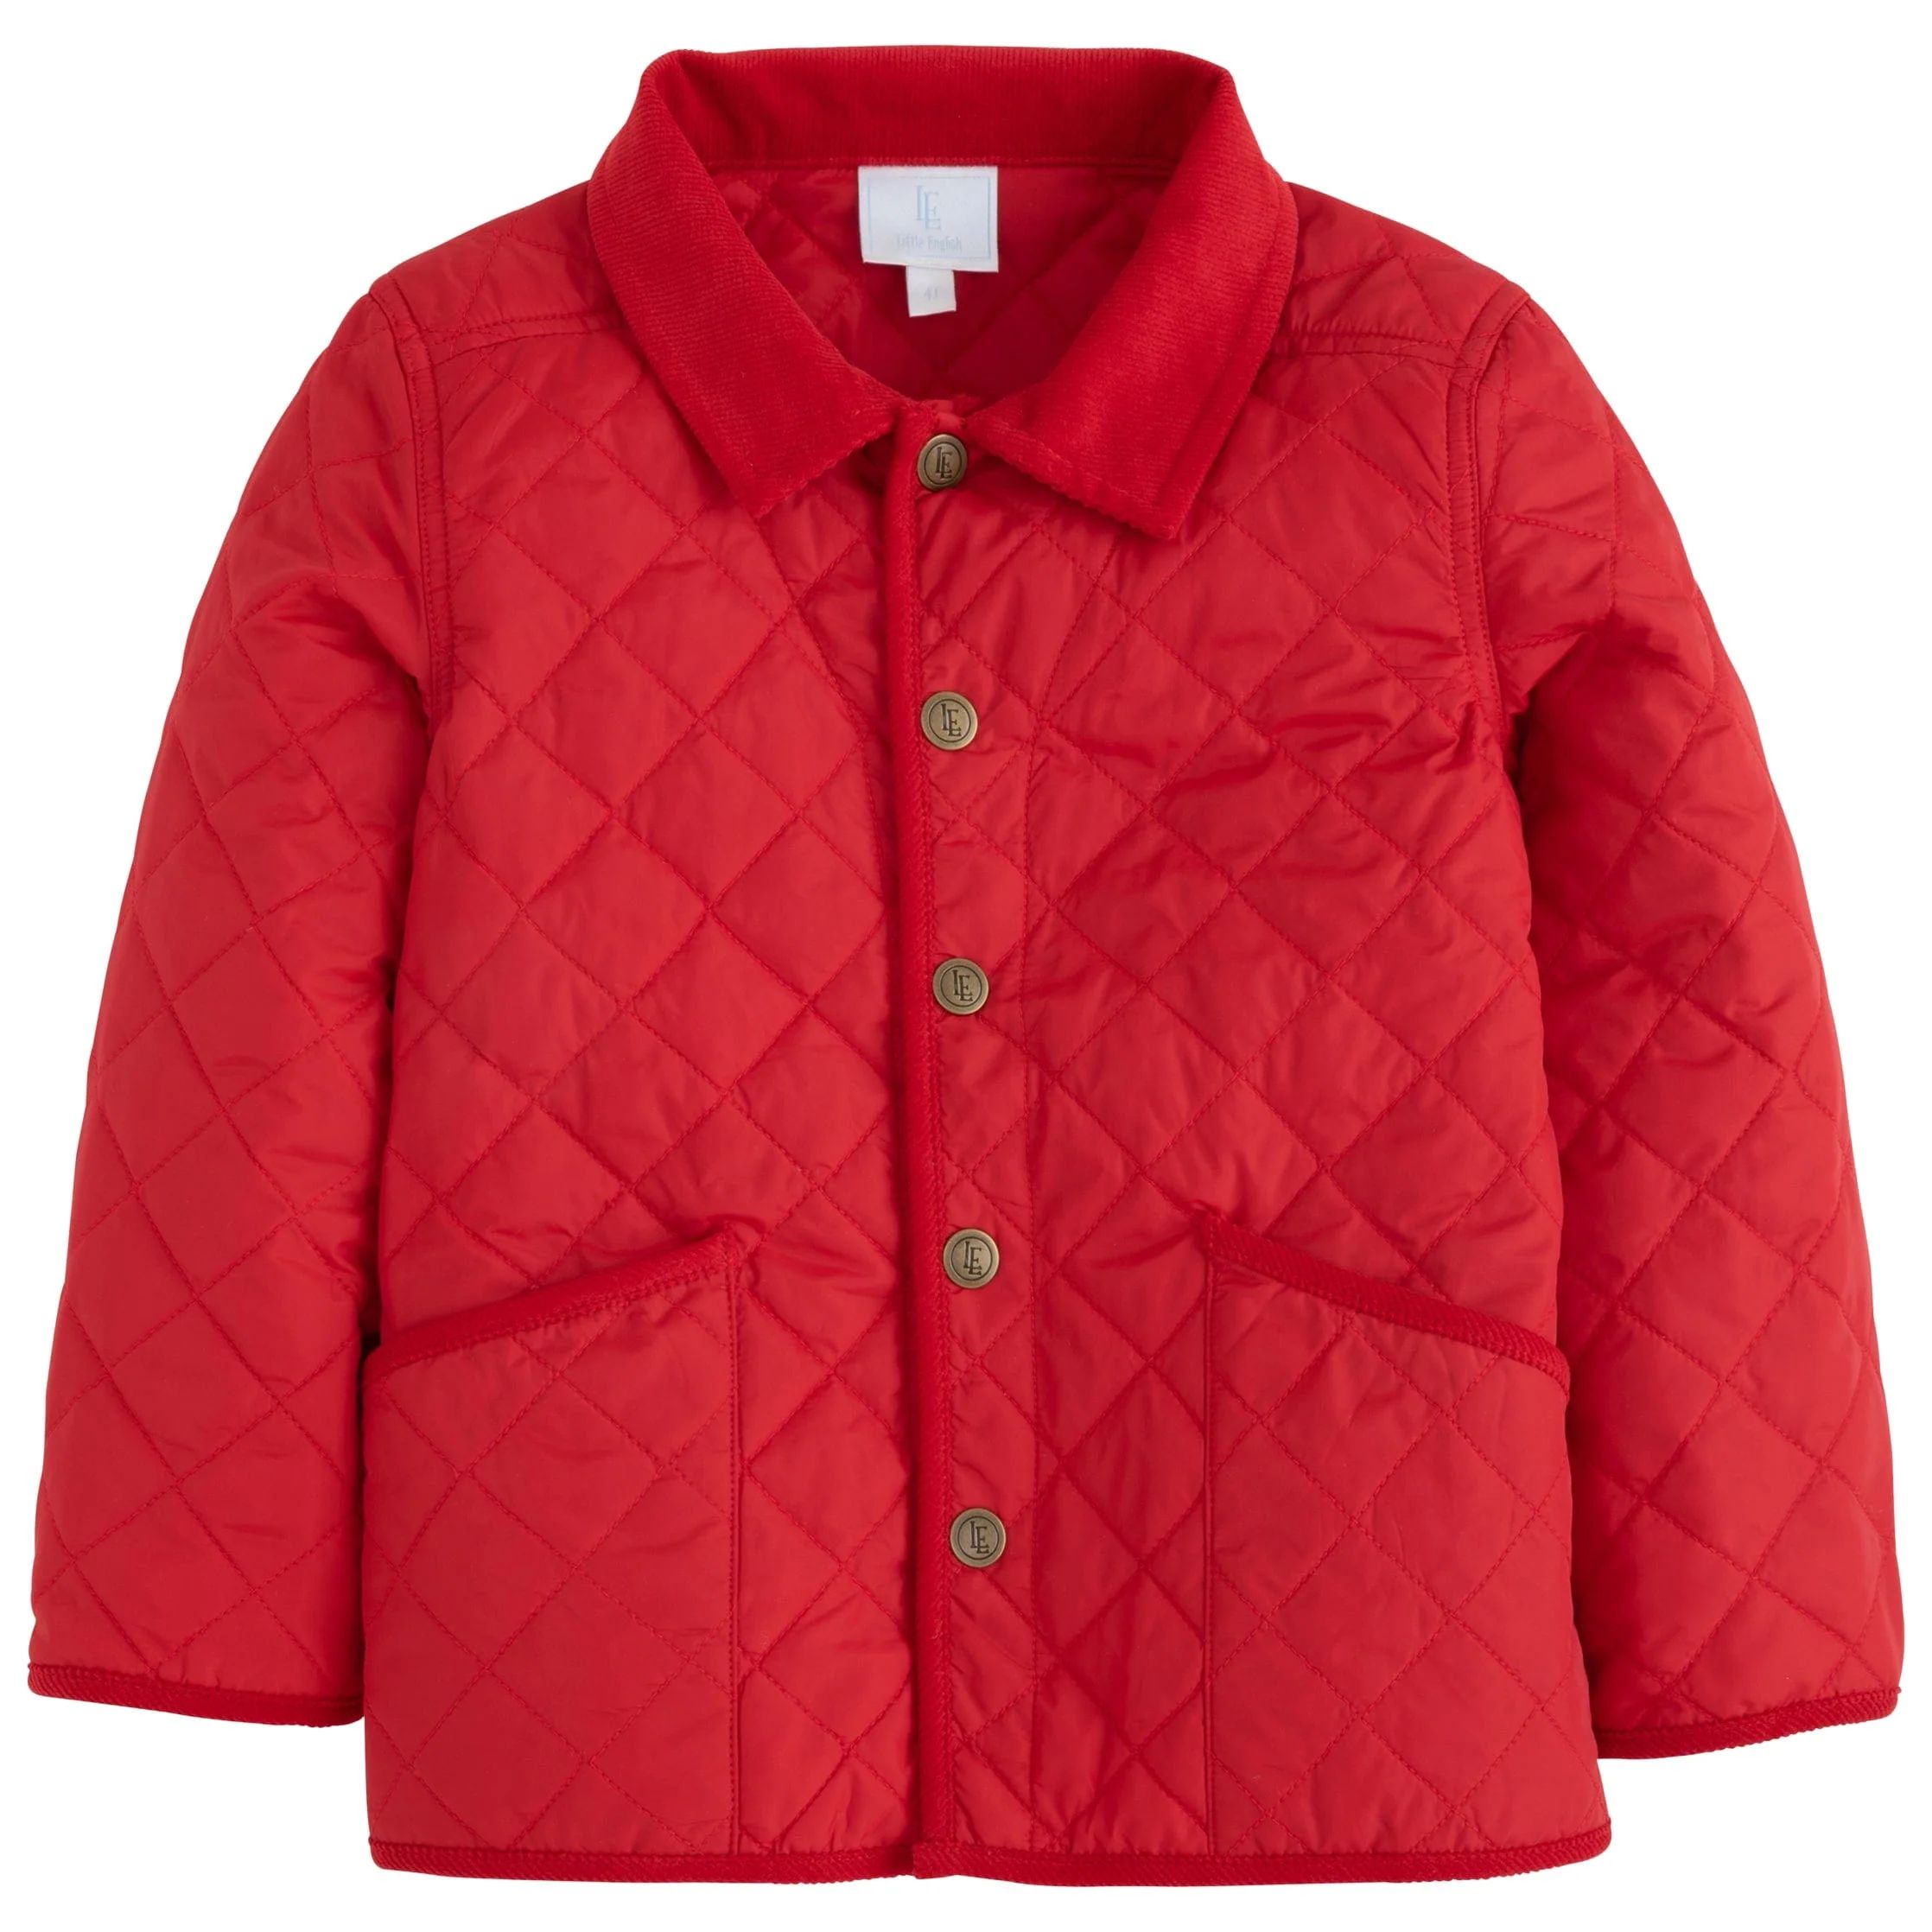 Boy & Girl's Red Quilted Jacket - Kids Outerwear | Little English